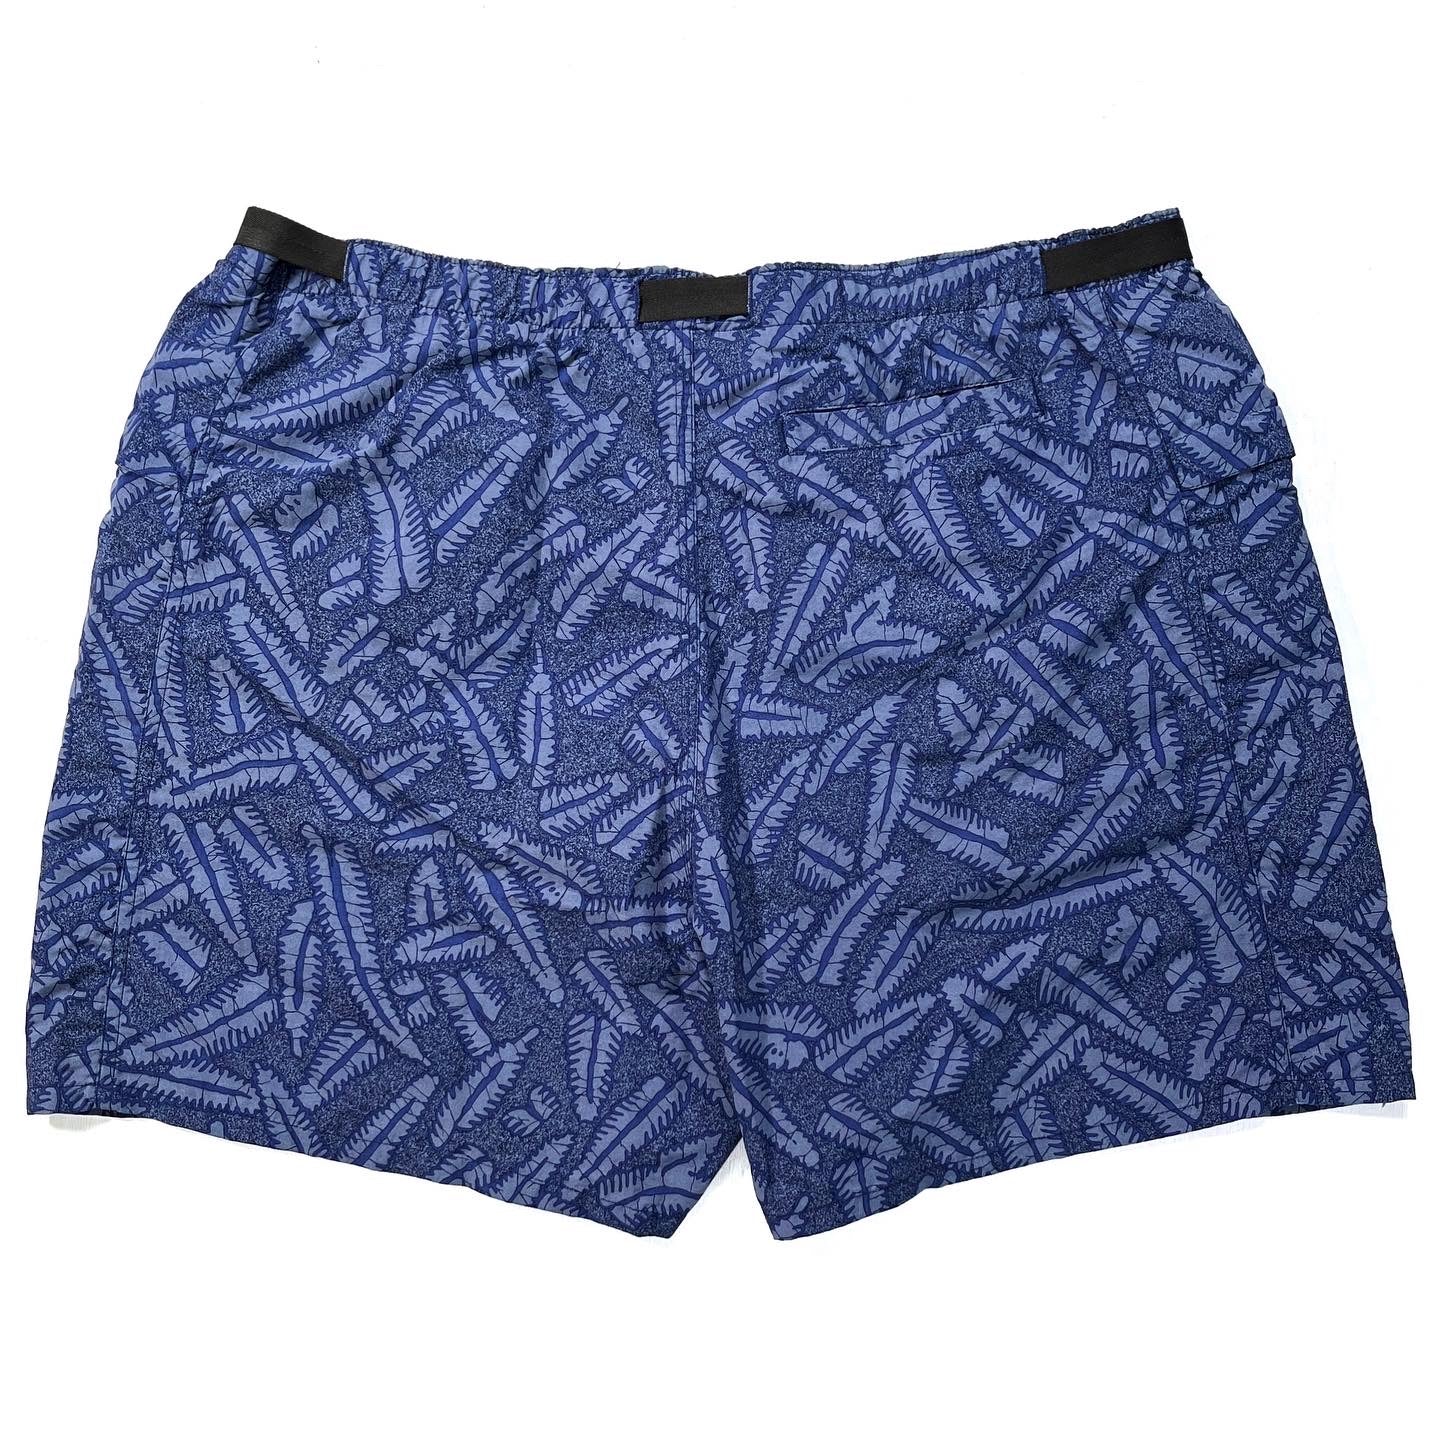 1996 Patagonia Mens 4” Printed River Shorts, Spiney: Blueberry (XL)